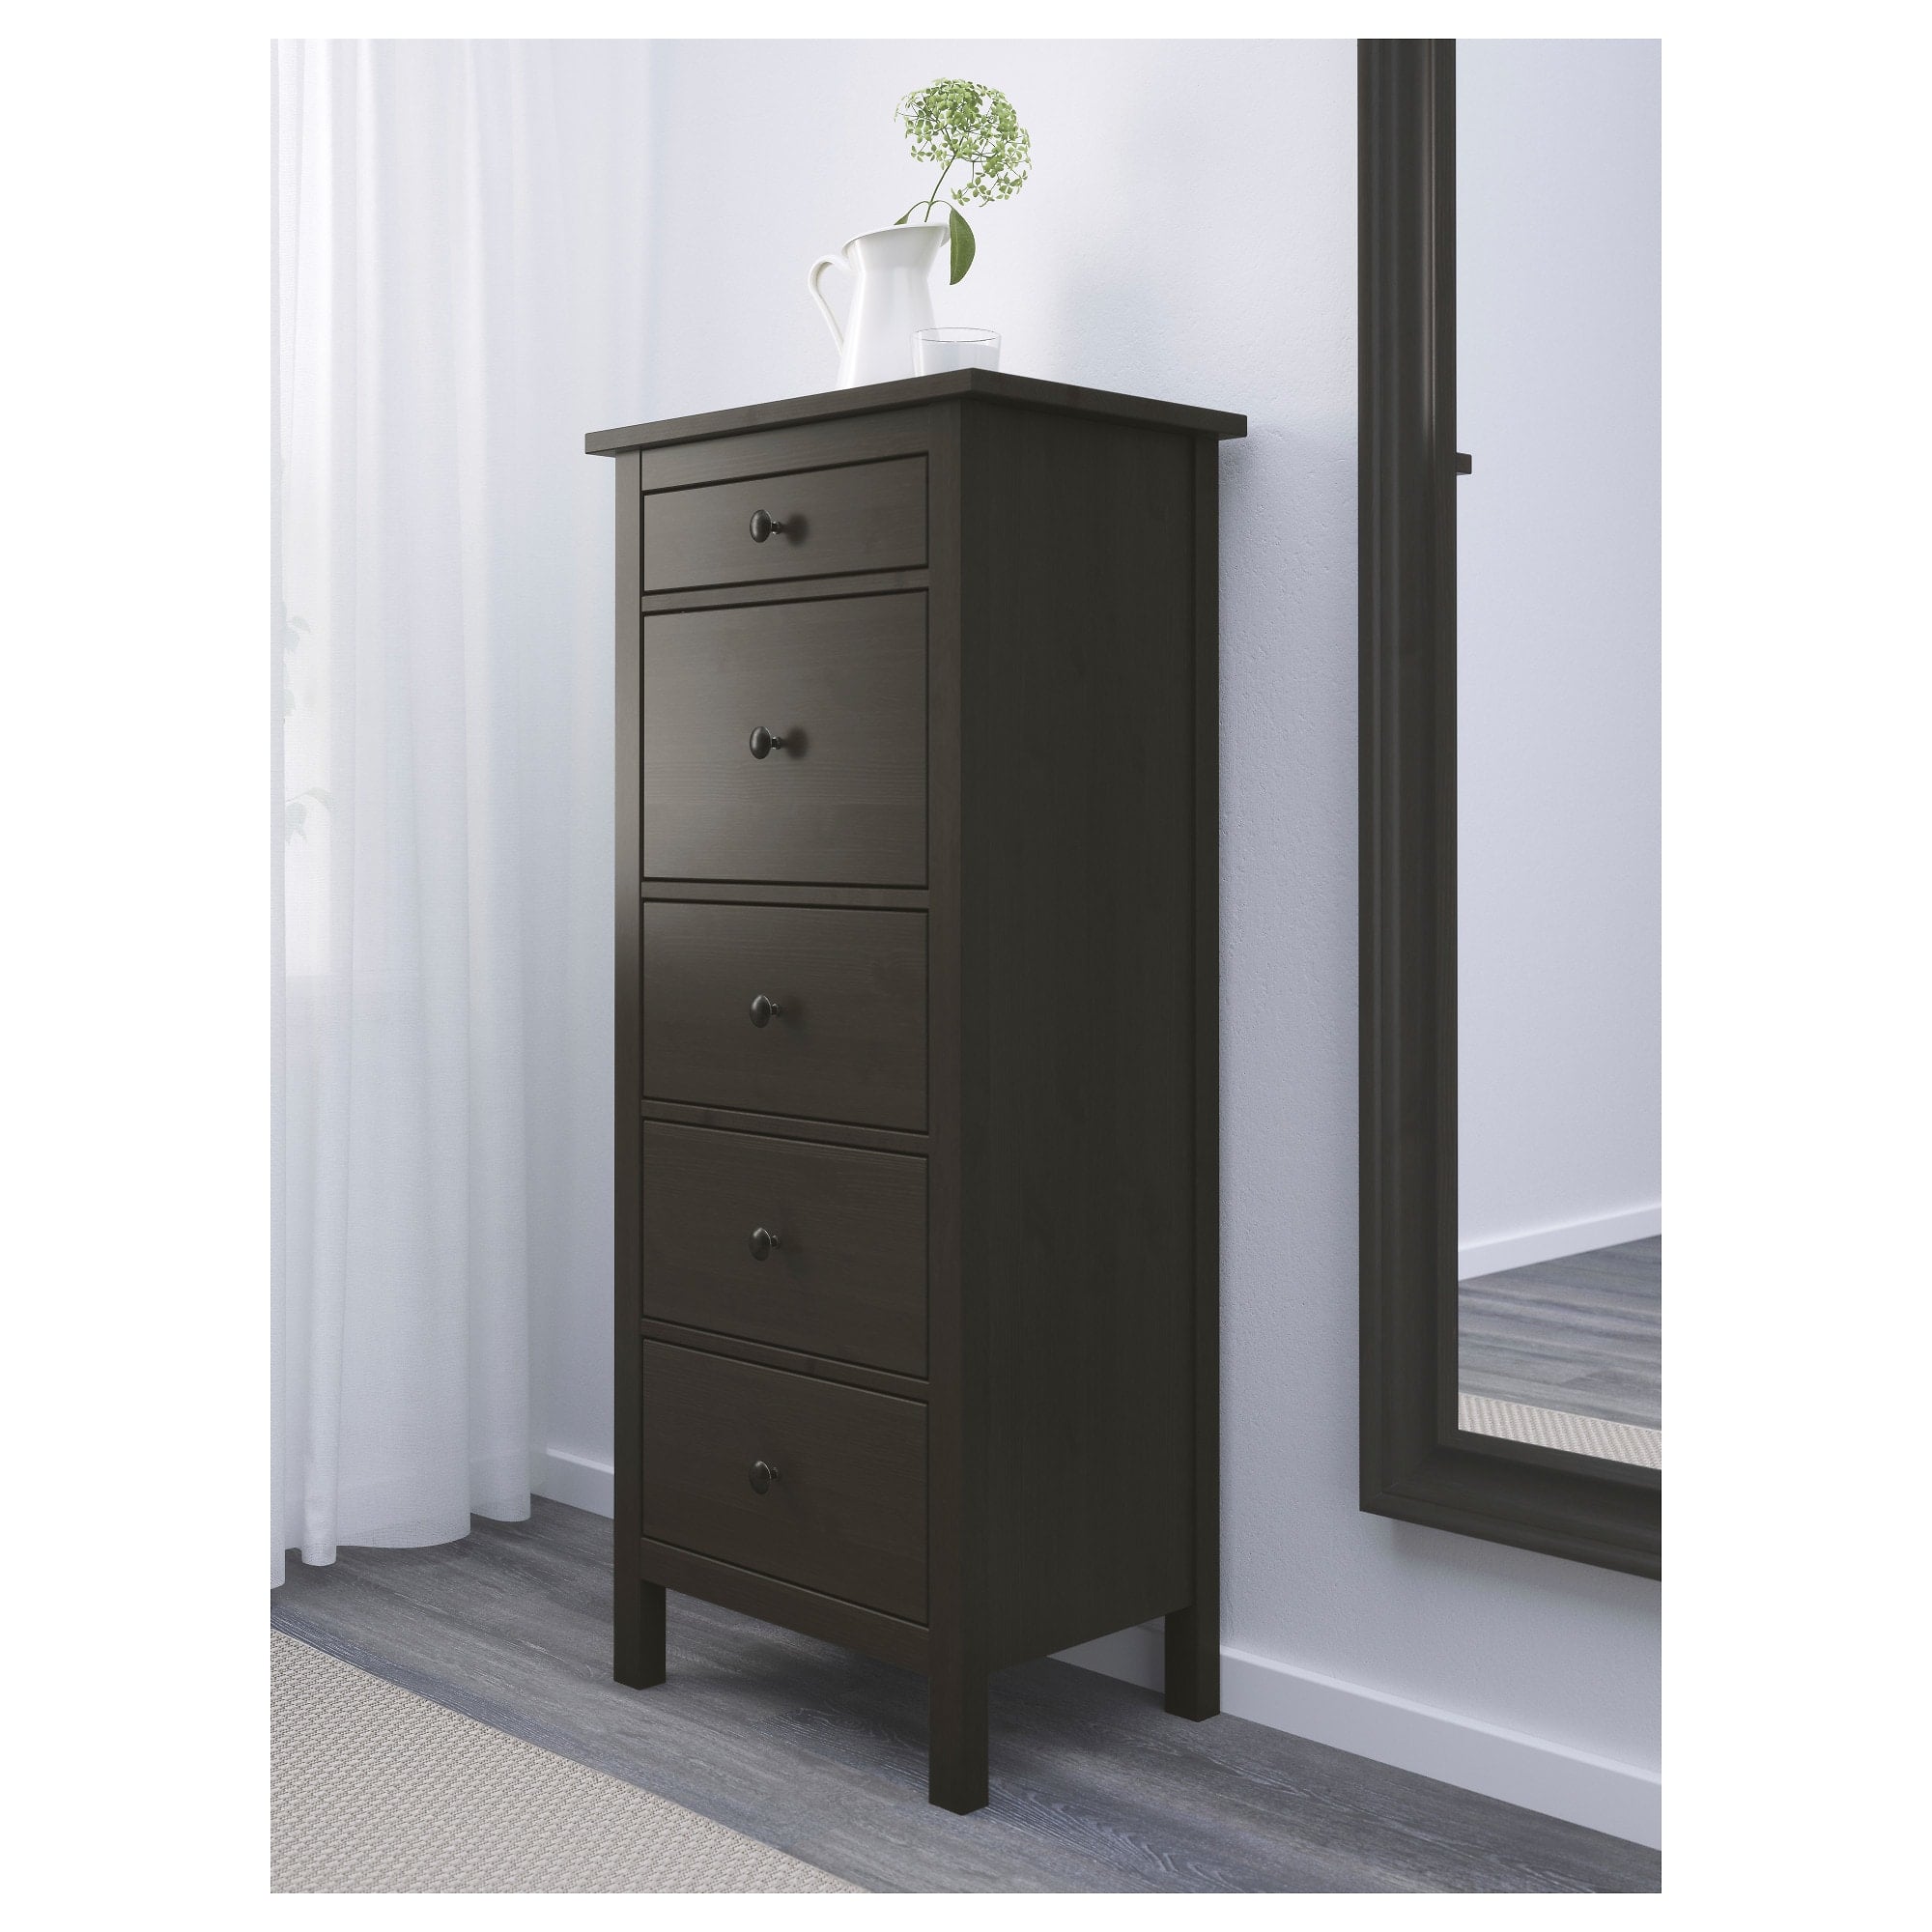 Hemnes Five Drawer Chest Ikea Has All Of The Space Saving